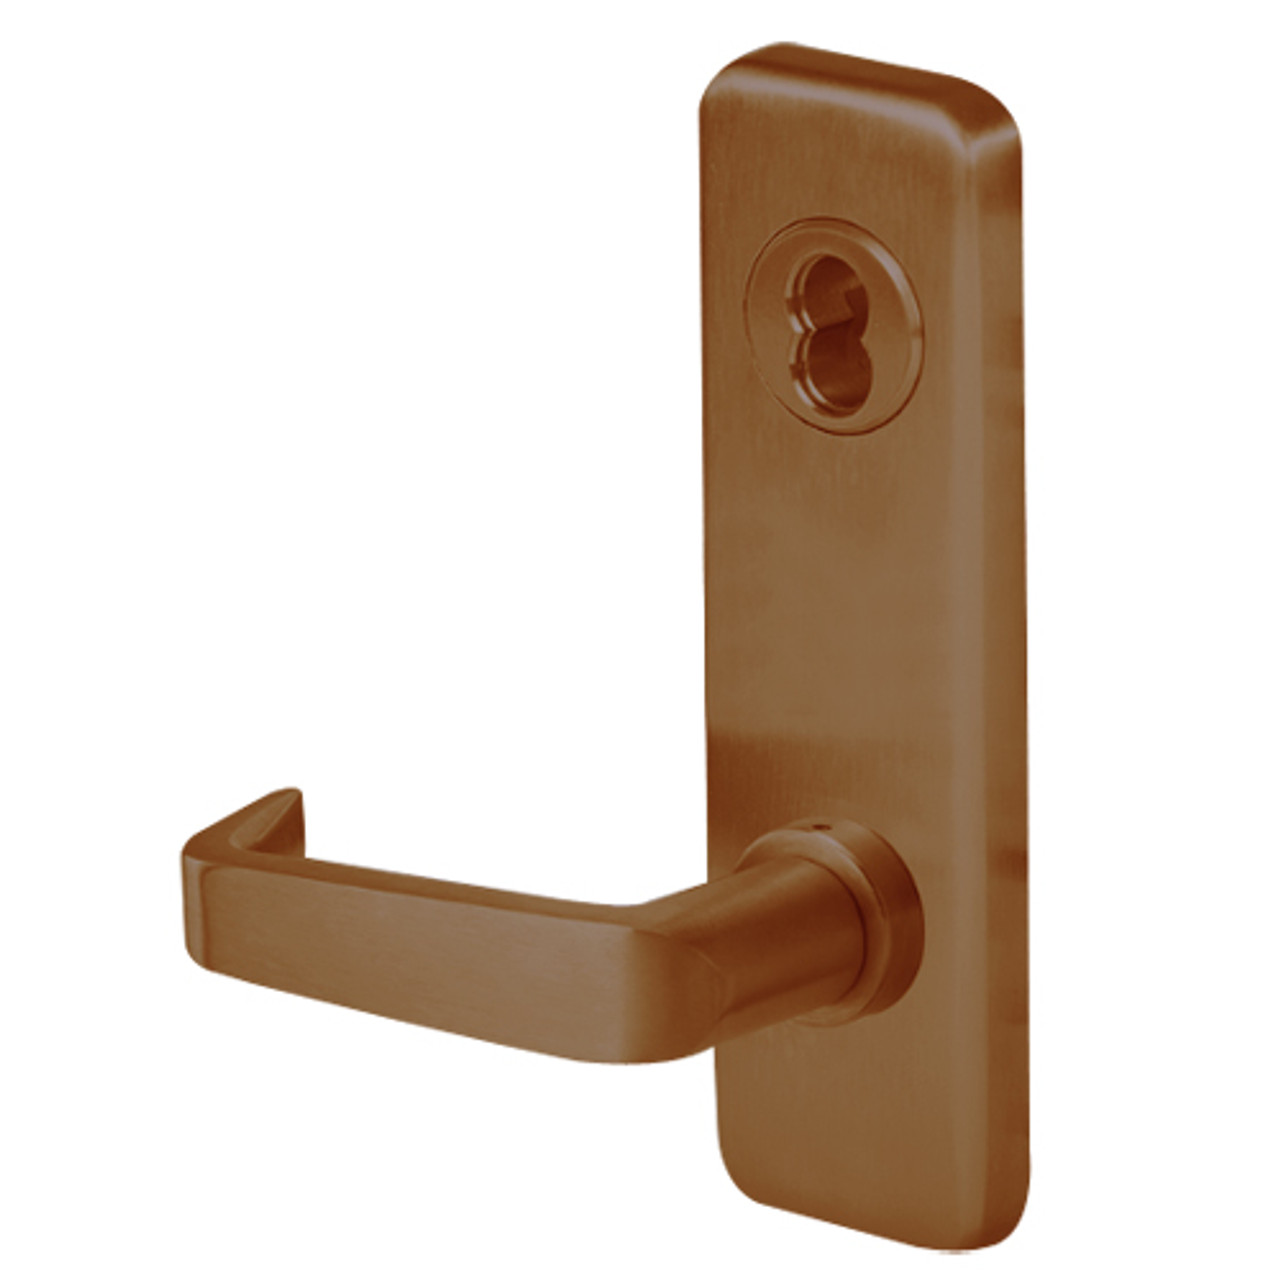 45H0LB15J690 Best 40H Series Privacy with Deadbolt Heavy Duty Mortise Lever Lock with Contour with Angle Return Style in Dark Bronze